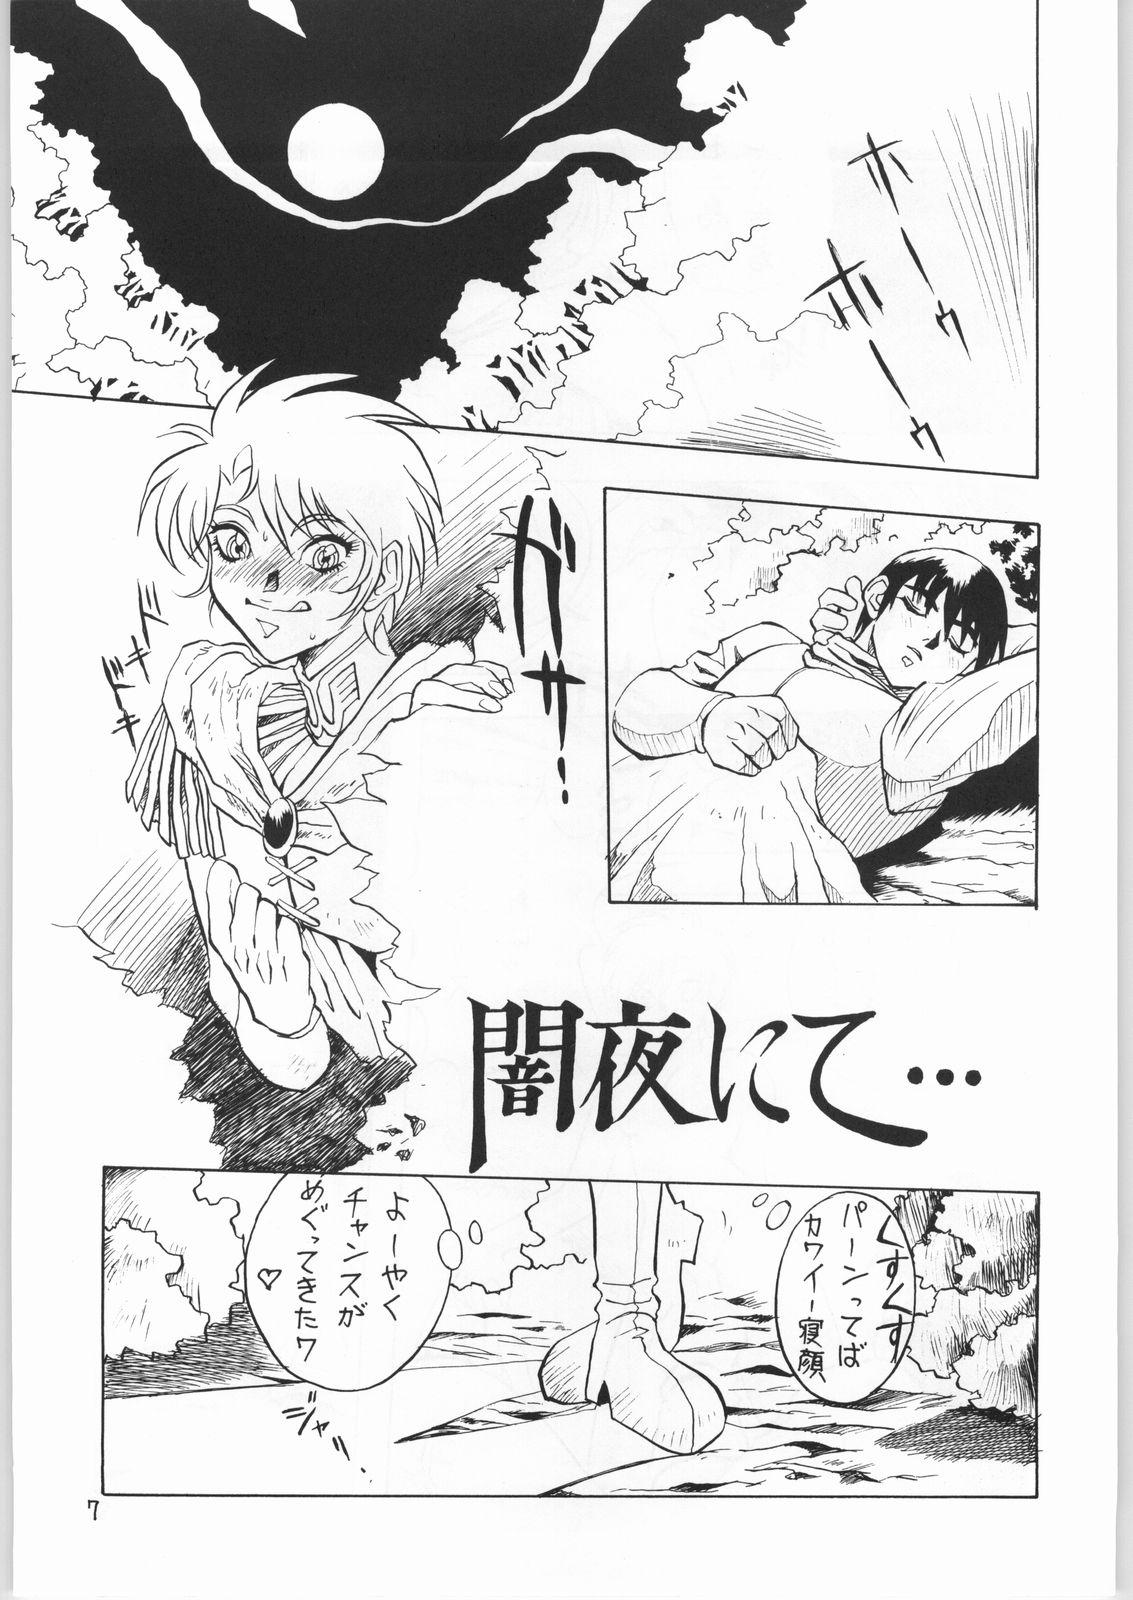 Movies Heroic Dreams - Record of lodoss war Str8 - Page 6